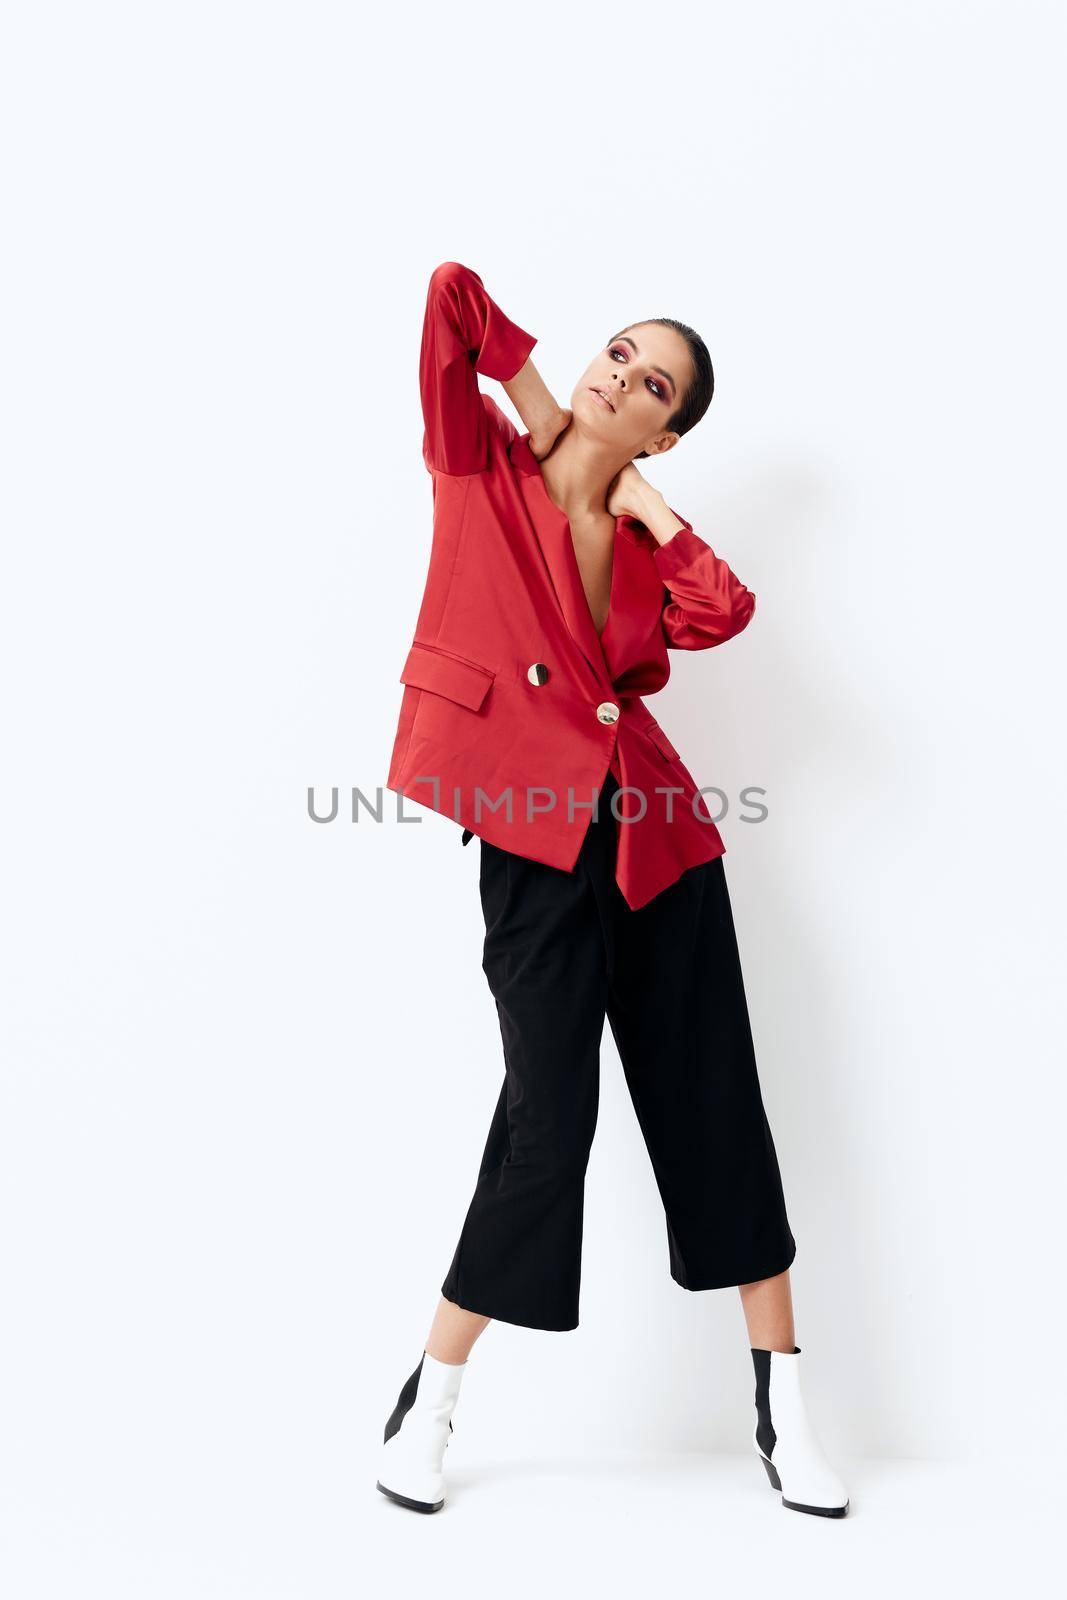 attractive woman in red jacket fashion bright makeup posing light background. High quality photo